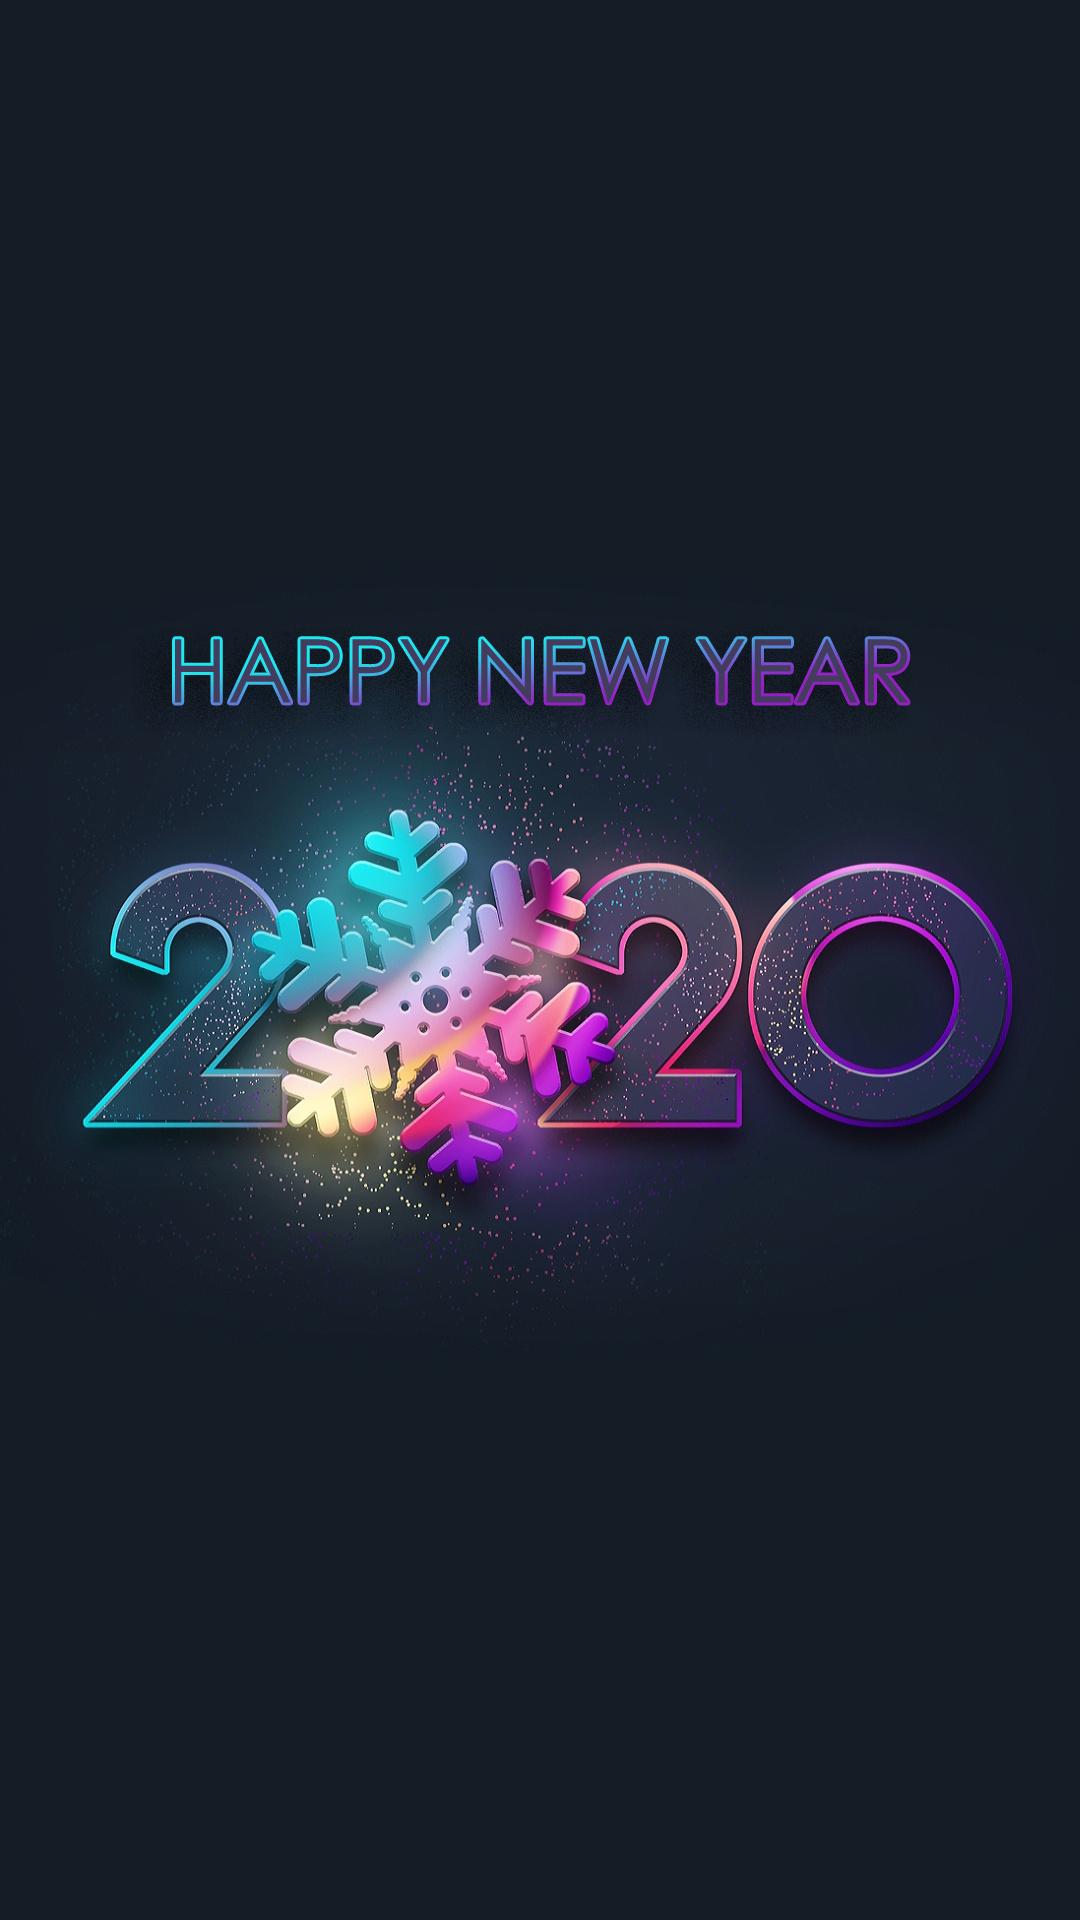 Happy New Year 2020 Wallpaper Mobile Walls